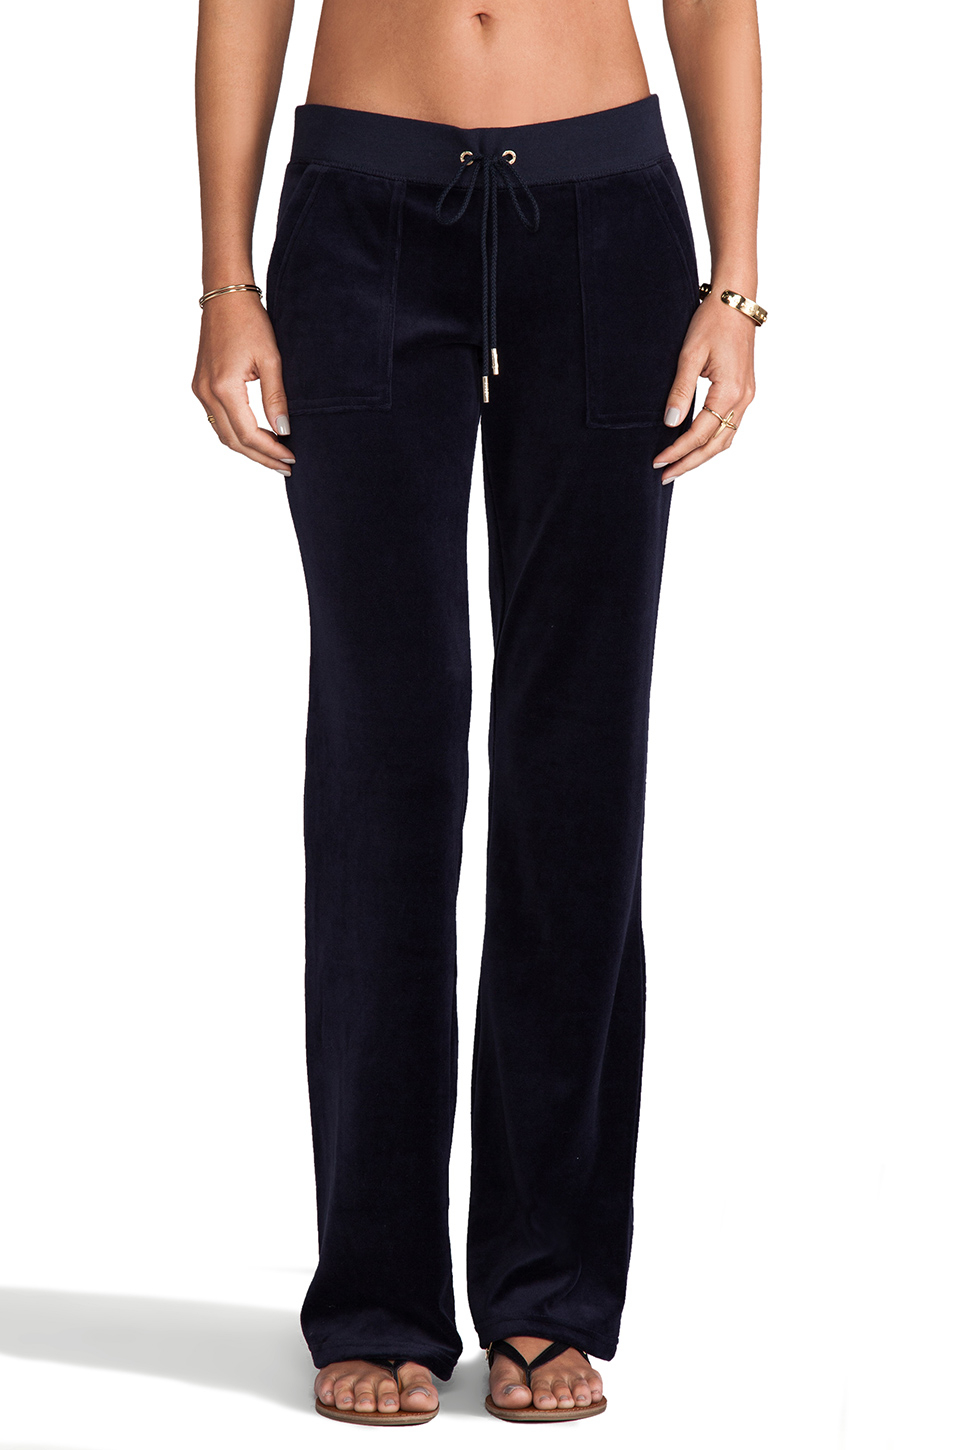 Juicy Couture J Bling Velour Bootcut Pant in Navy in Blue - Lyst